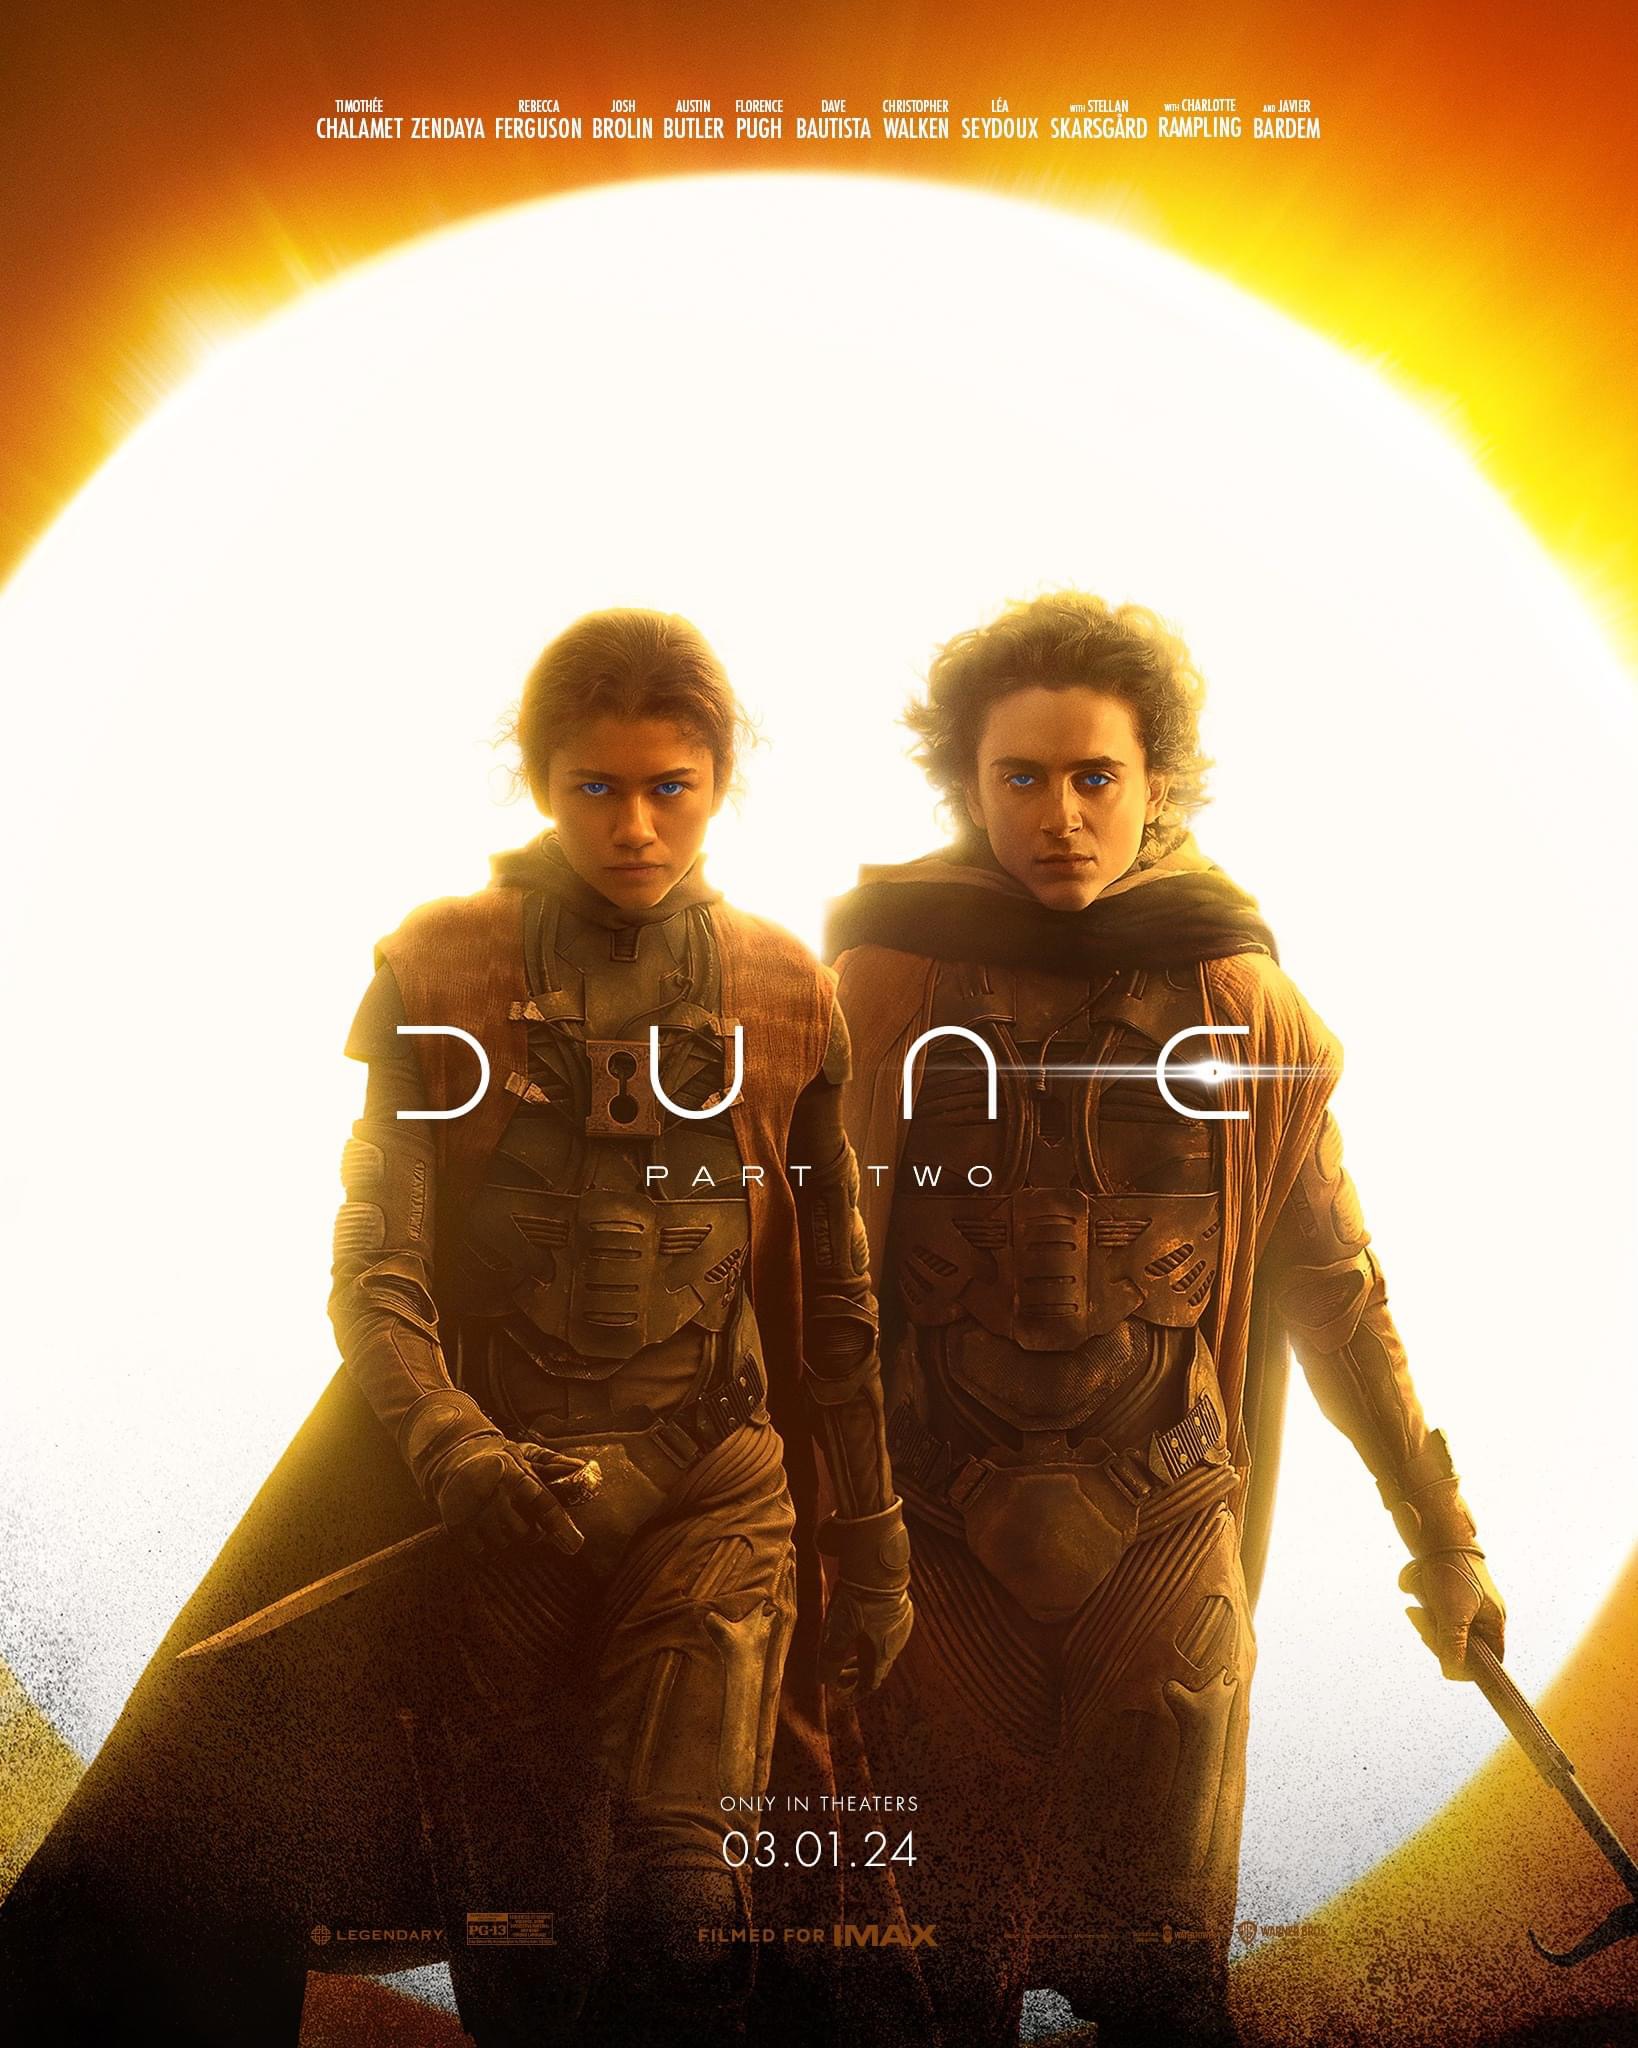 Check out the new posters for Dune Part Two in theatres March 1st!